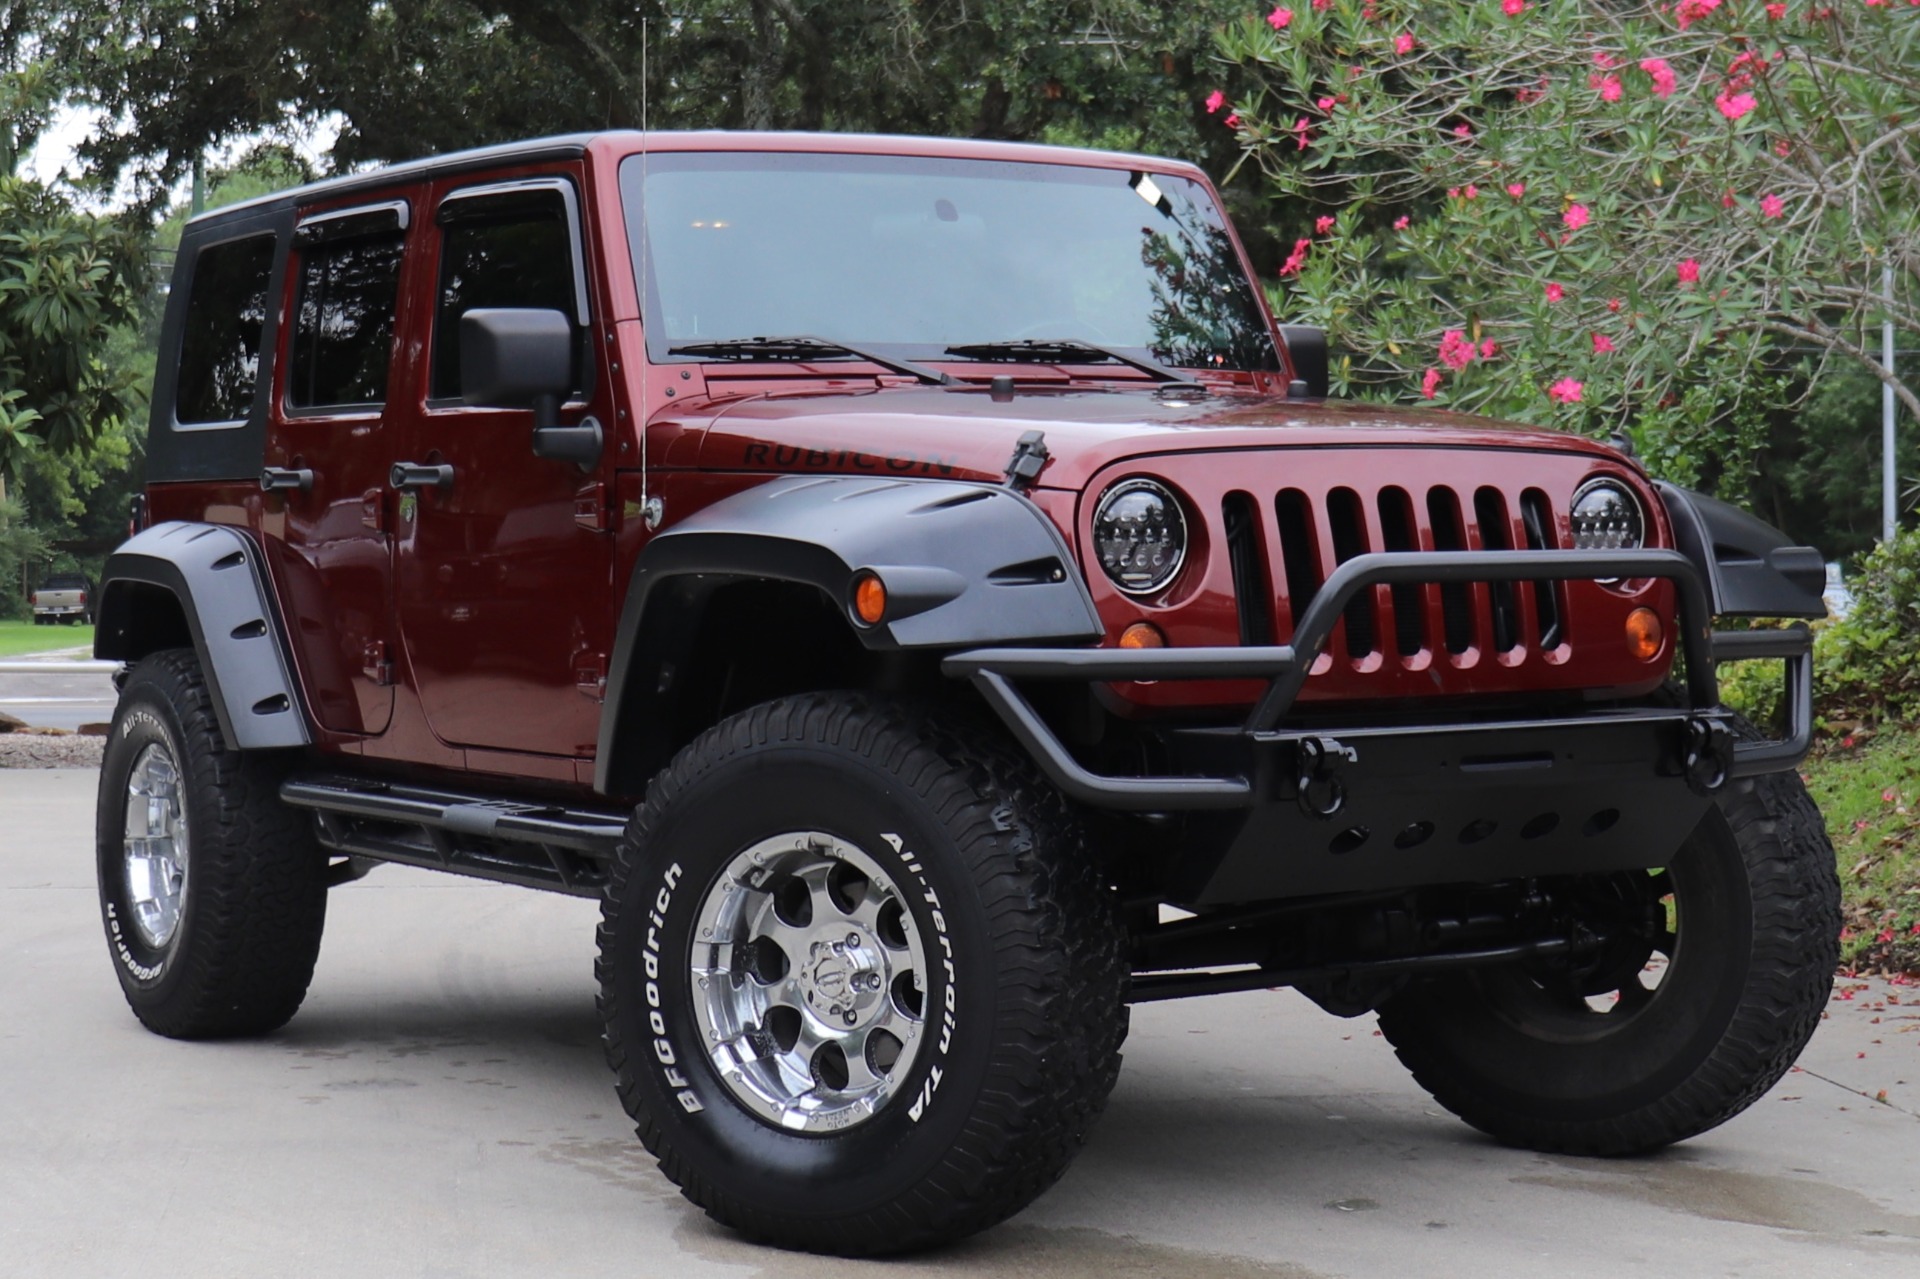 Used 2010 Jeep Rubicon Unlimited Rubicon For Sale ($24,995) | Select ...